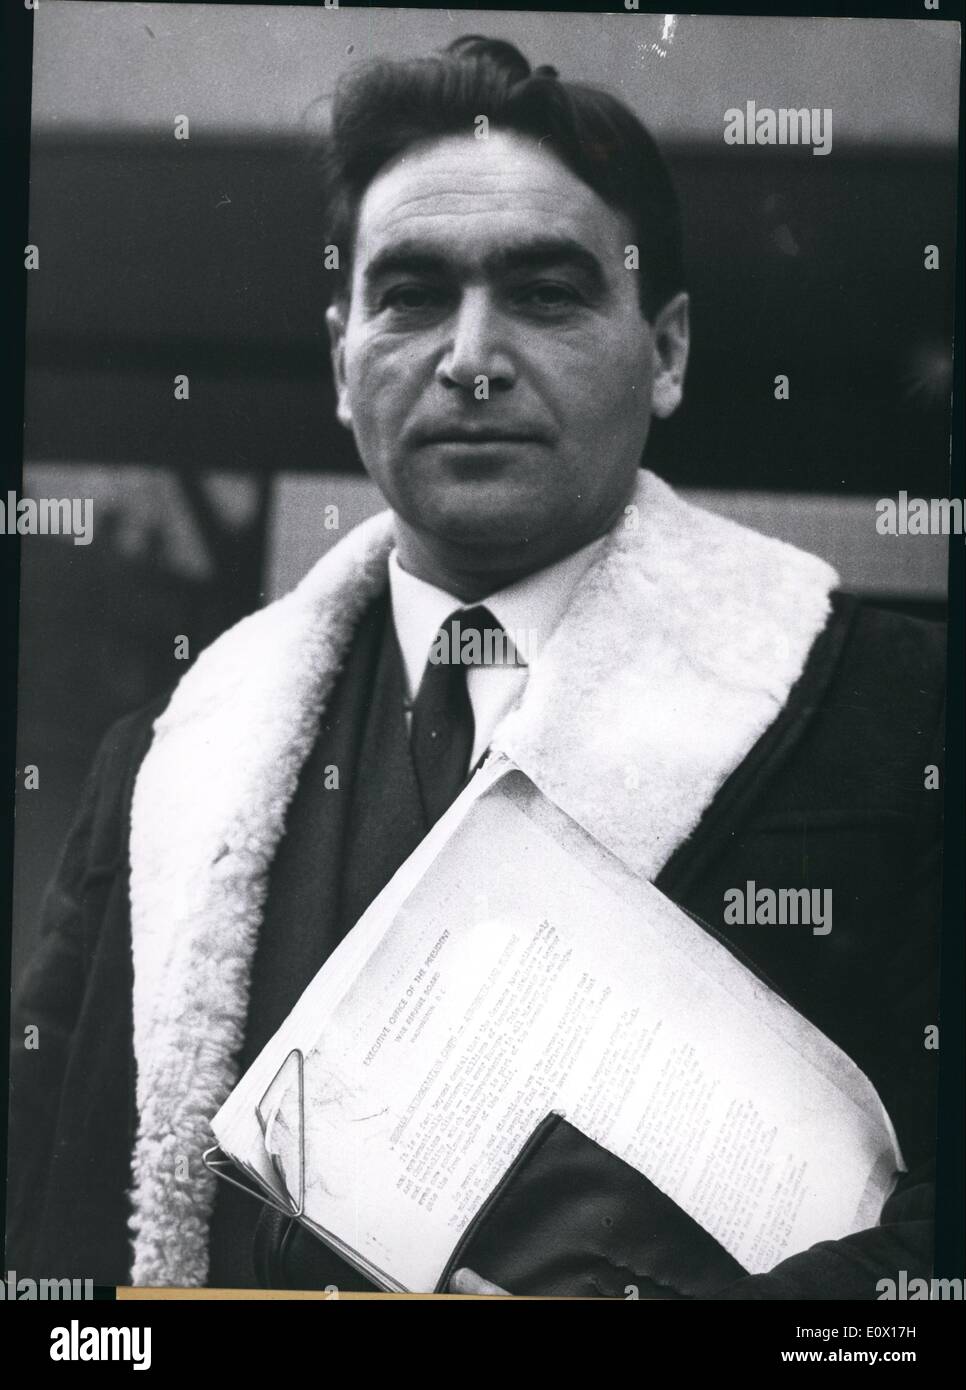 Dec. 12, 1964 - Escape From Auschwitz Testifies In Frankfurt Trials: The biochemist Dr. Rudolf VRBA, born in Slovakia and now living in London, appeared before the grand jury in Frankfurt, Germany, to testifay against the accused former SS-guards of the AUschwitz extermination camp and the former Eichmann-aides Hunsche and Krumey, who are facing the court in a separate trial. Dr. Vrba, 40, a jew with the birth name Rosenberg, changes his name after he had managed to escape from Auschwitz in April 1944, where he was held as prisoner facing death in the terrible gas chambers Stock Photo